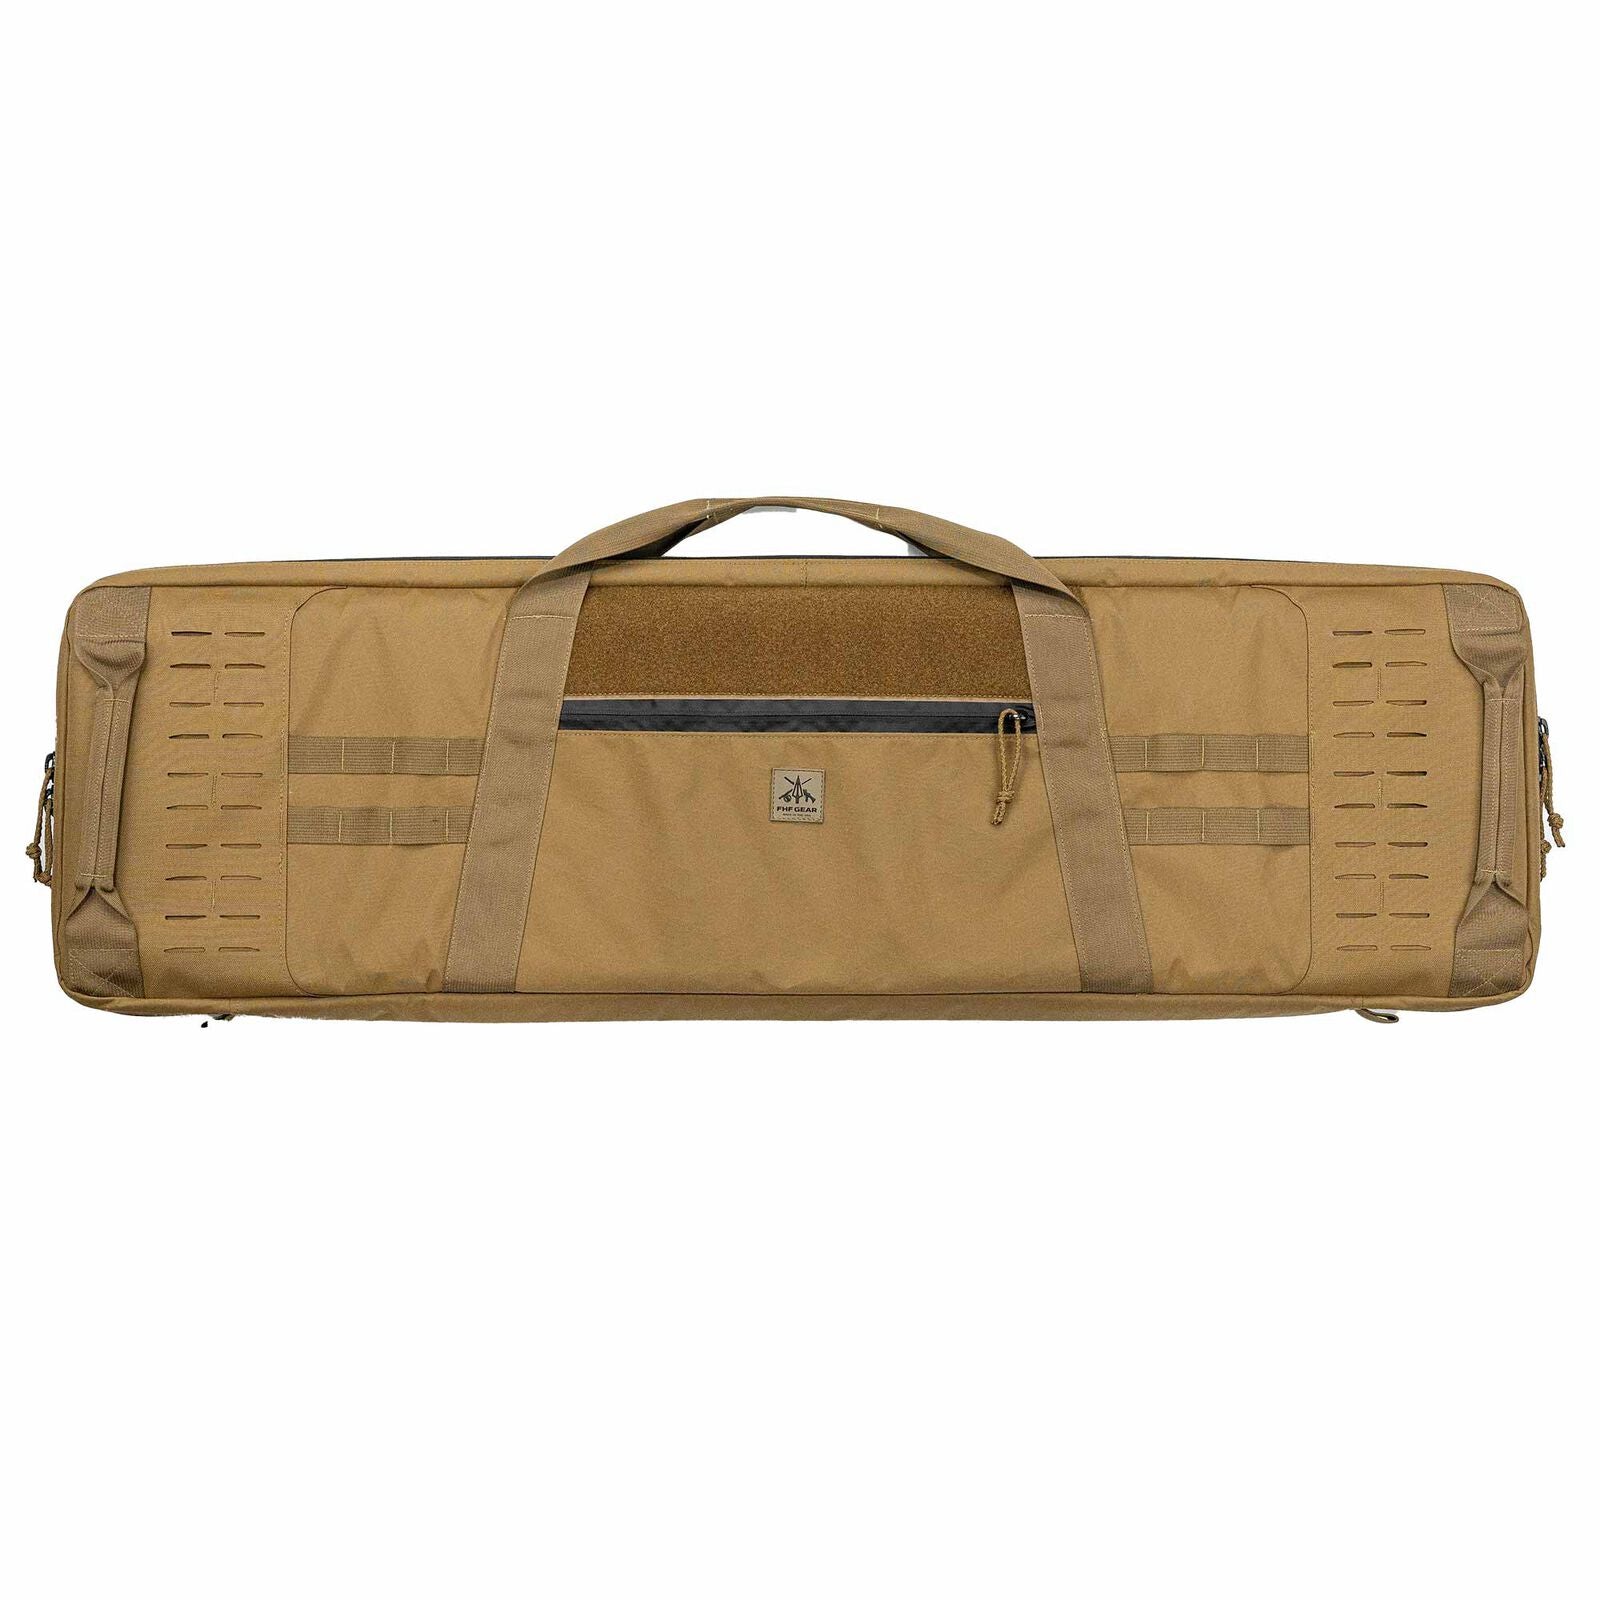 FHF Gear Tac Mtn Rifle Case Coyote Front